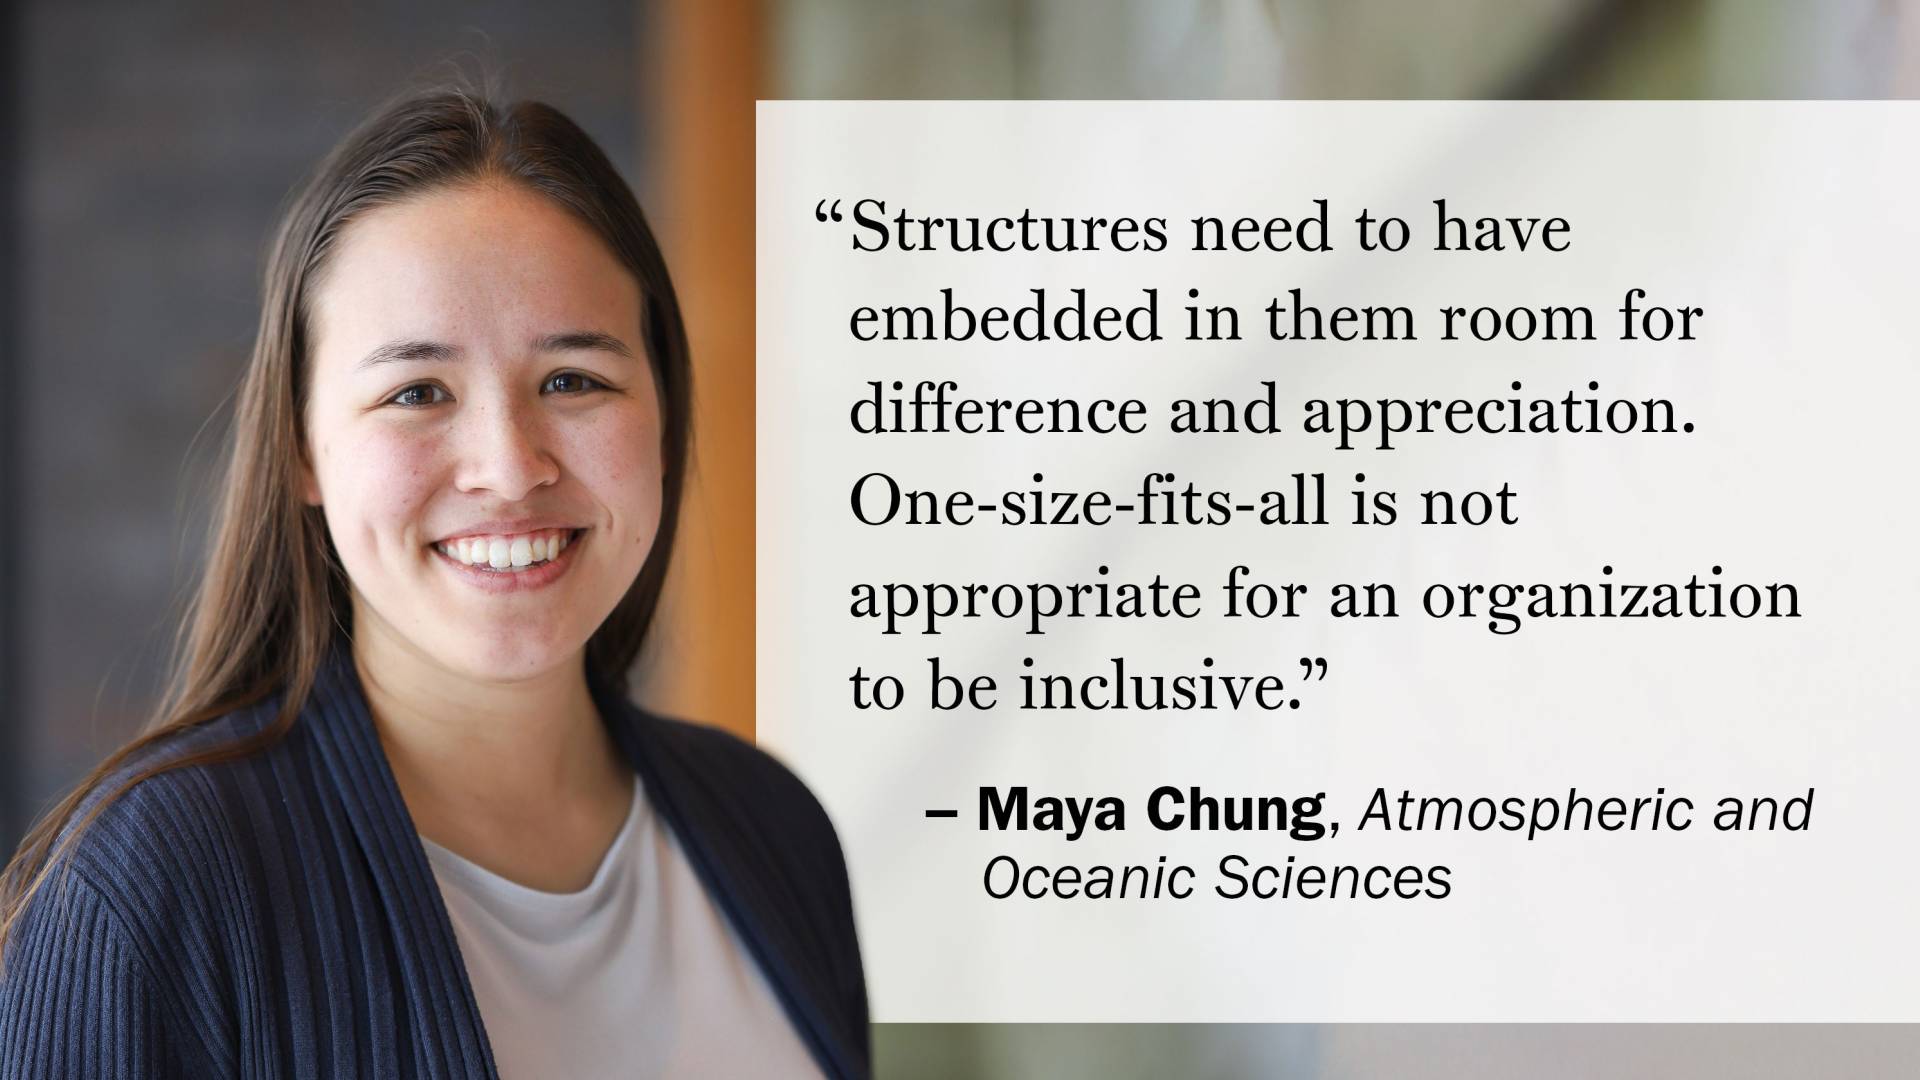 "Structures need to have embedded in them room for difference and appreciation. One-size-fits-all is not appropriate for an organization to be inclusive." —Maya Chung, Atmospheric and Oceanic Sciences